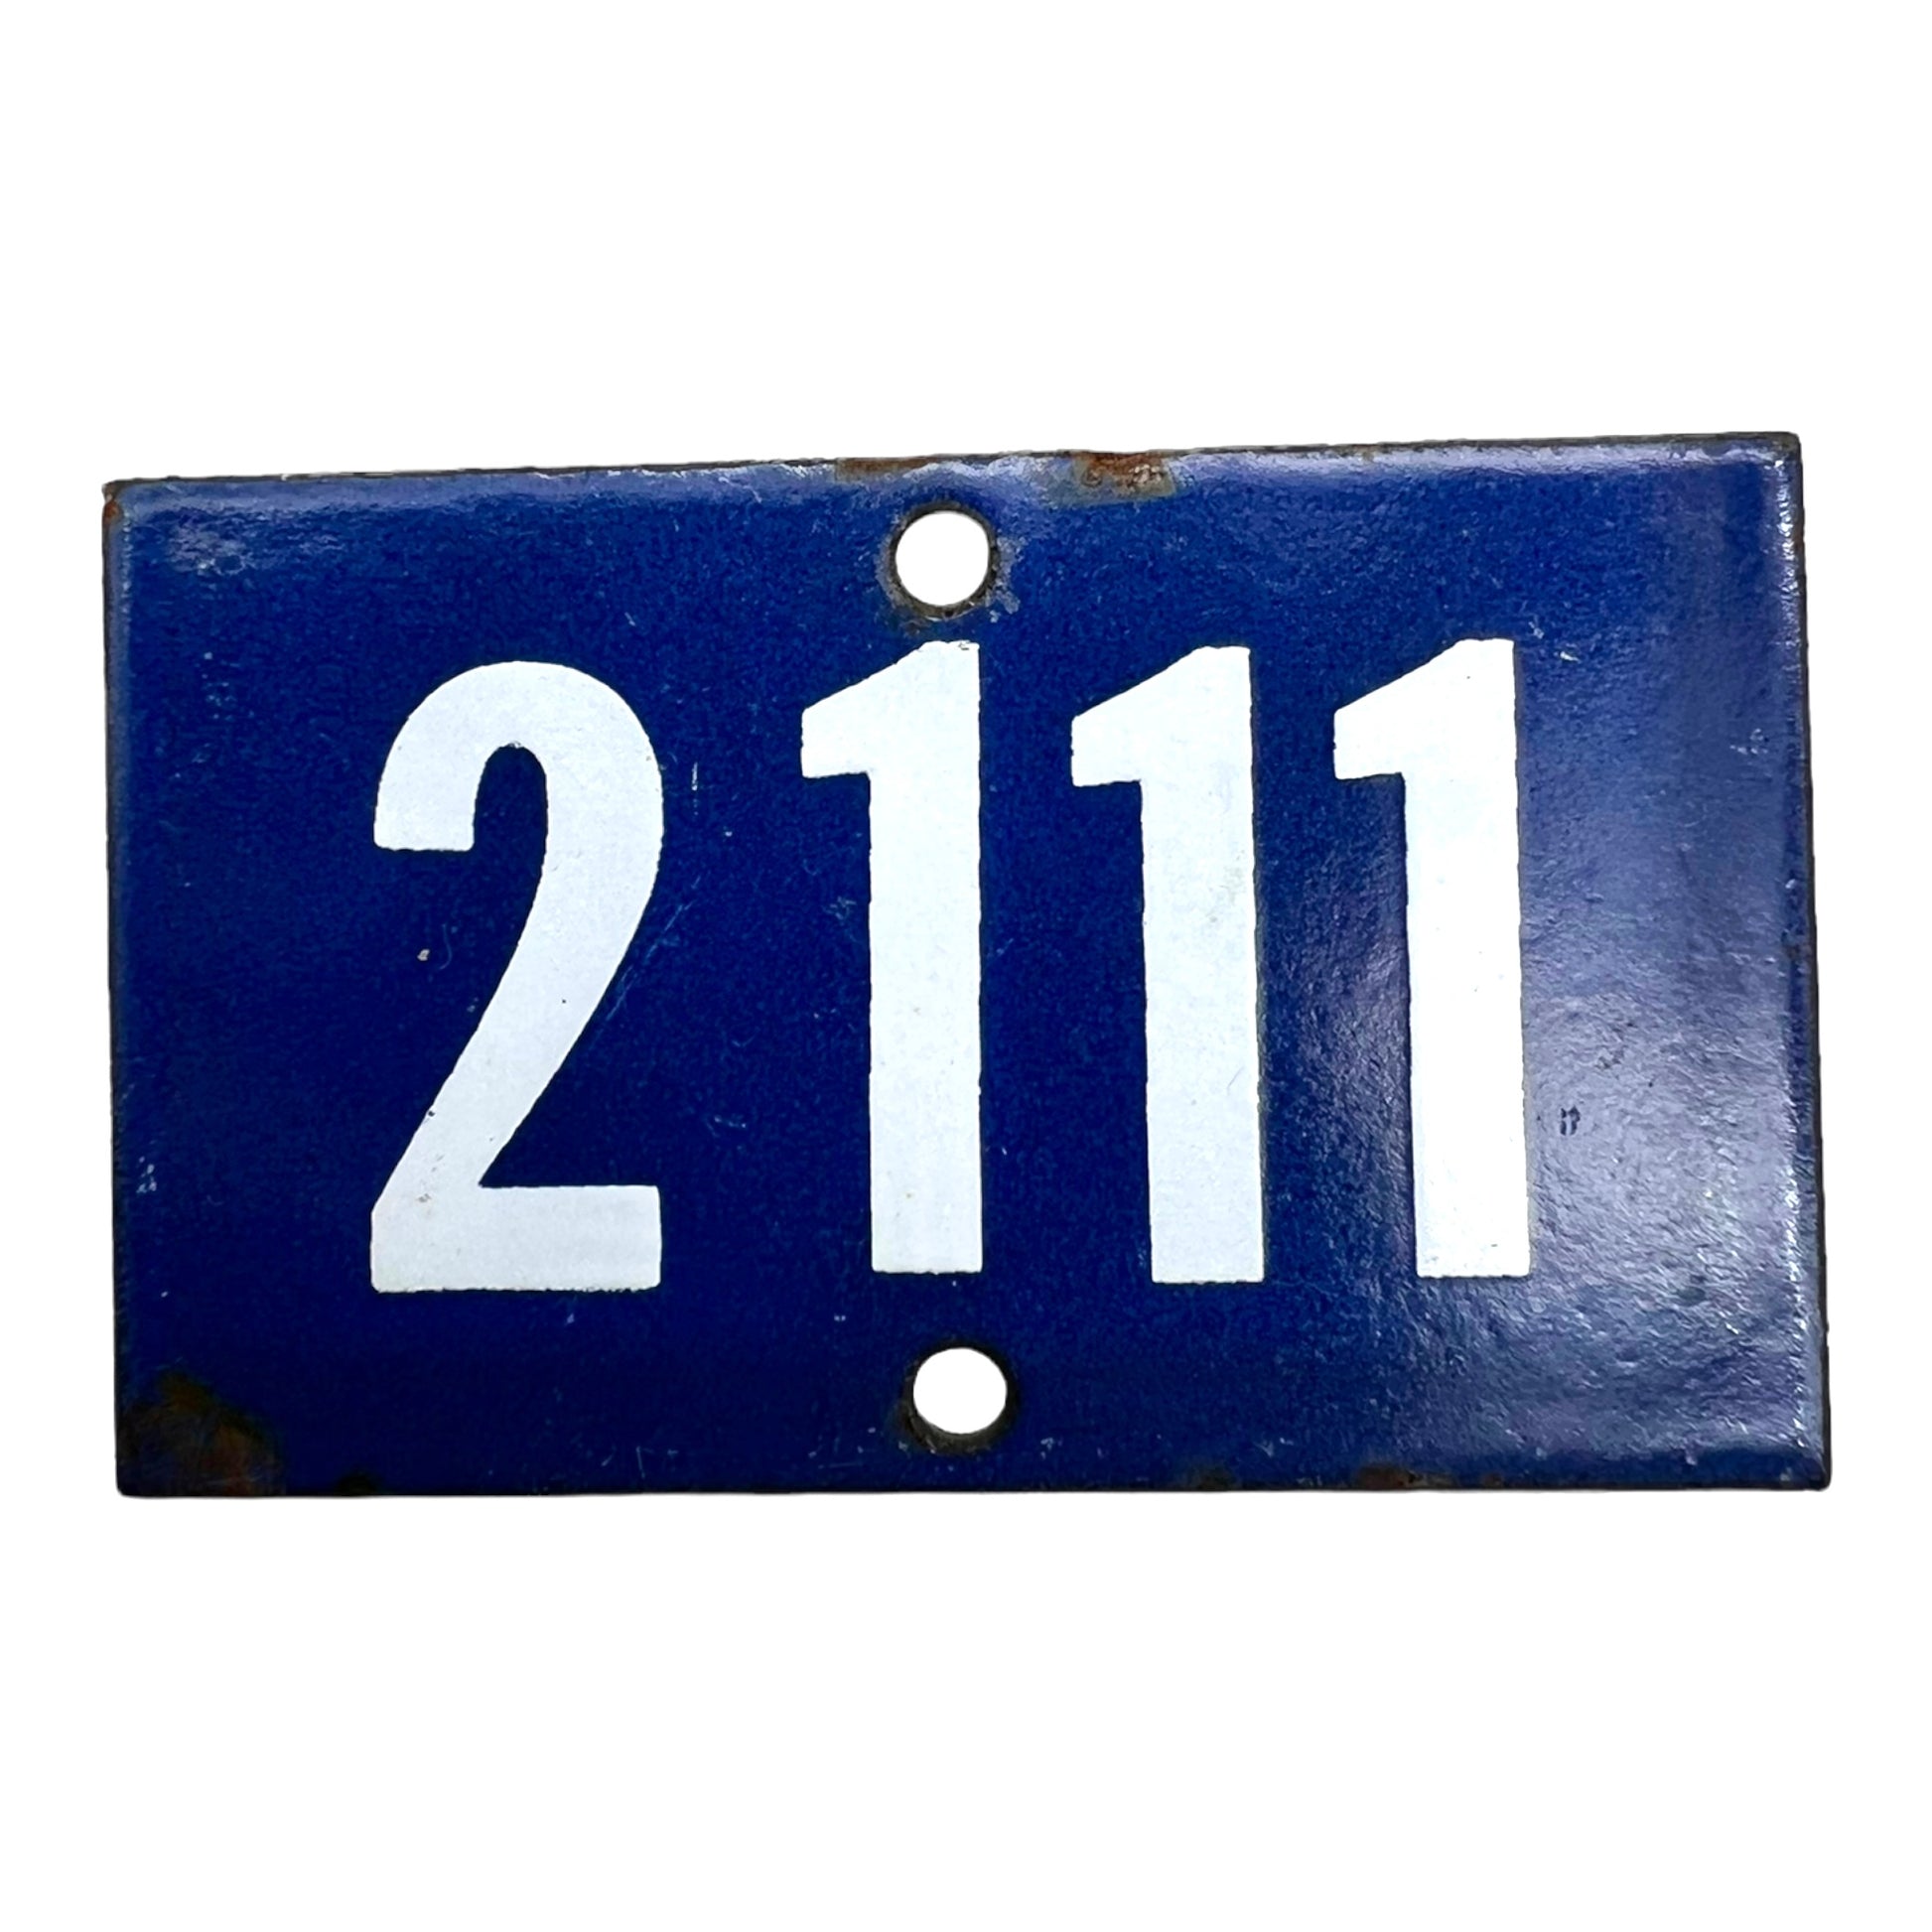 Image of blue enamel house or door number 2111 sold by All Things French Store